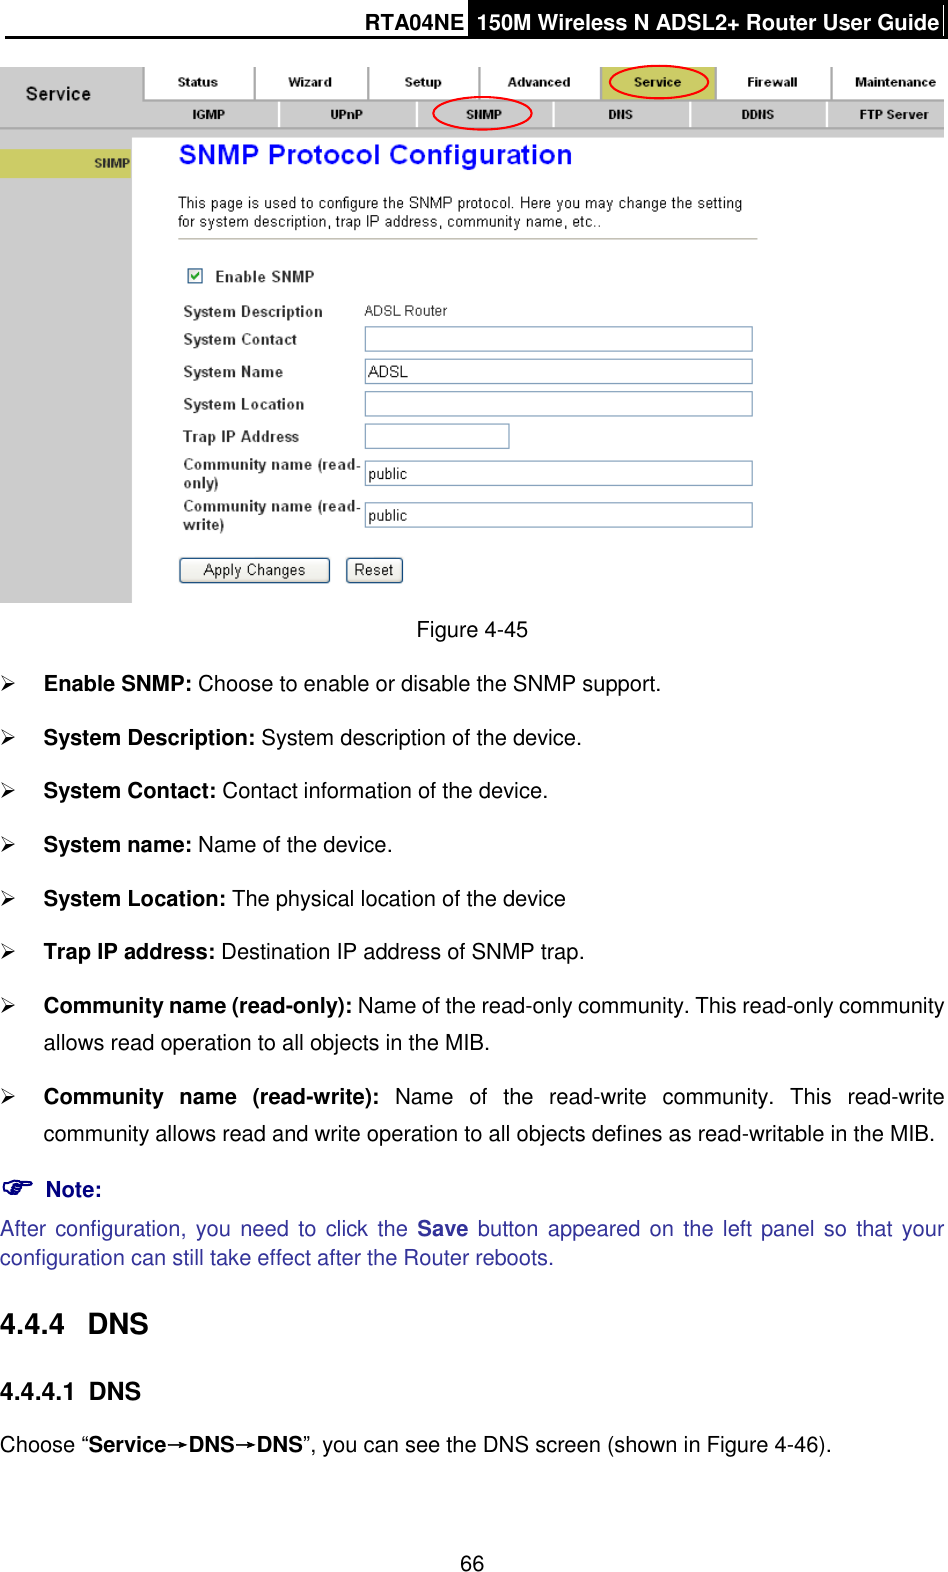 RTA04NE 150M Wireless N ADSL2+ Router User Guide  66  Figure 4-45  Enable SNMP: Choose to enable or disable the SNMP support.  System Description: System description of the device.  System Contact: Contact information of the device.  System name: Name of the device.  System Location: The physical location of the device  Trap IP address: Destination IP address of SNMP trap.  Community name (read-only): Name of the read-only community. This read-only community allows read operation to all objects in the MIB.  Community  name  (read-write):  Name  of  the  read-write  community.  This  read-write community allows read and write operation to all objects defines as read-writable in the MIB.  Note: After configuration, you need to click the Save button appeared on  the left panel so  that your configuration can still take effect after the Router reboots. 4.4.4  DNS 4.4.4.1  DNS Choose “Service→DNS→DNS”, you can see the DNS screen (shown in Figure 4-46). 